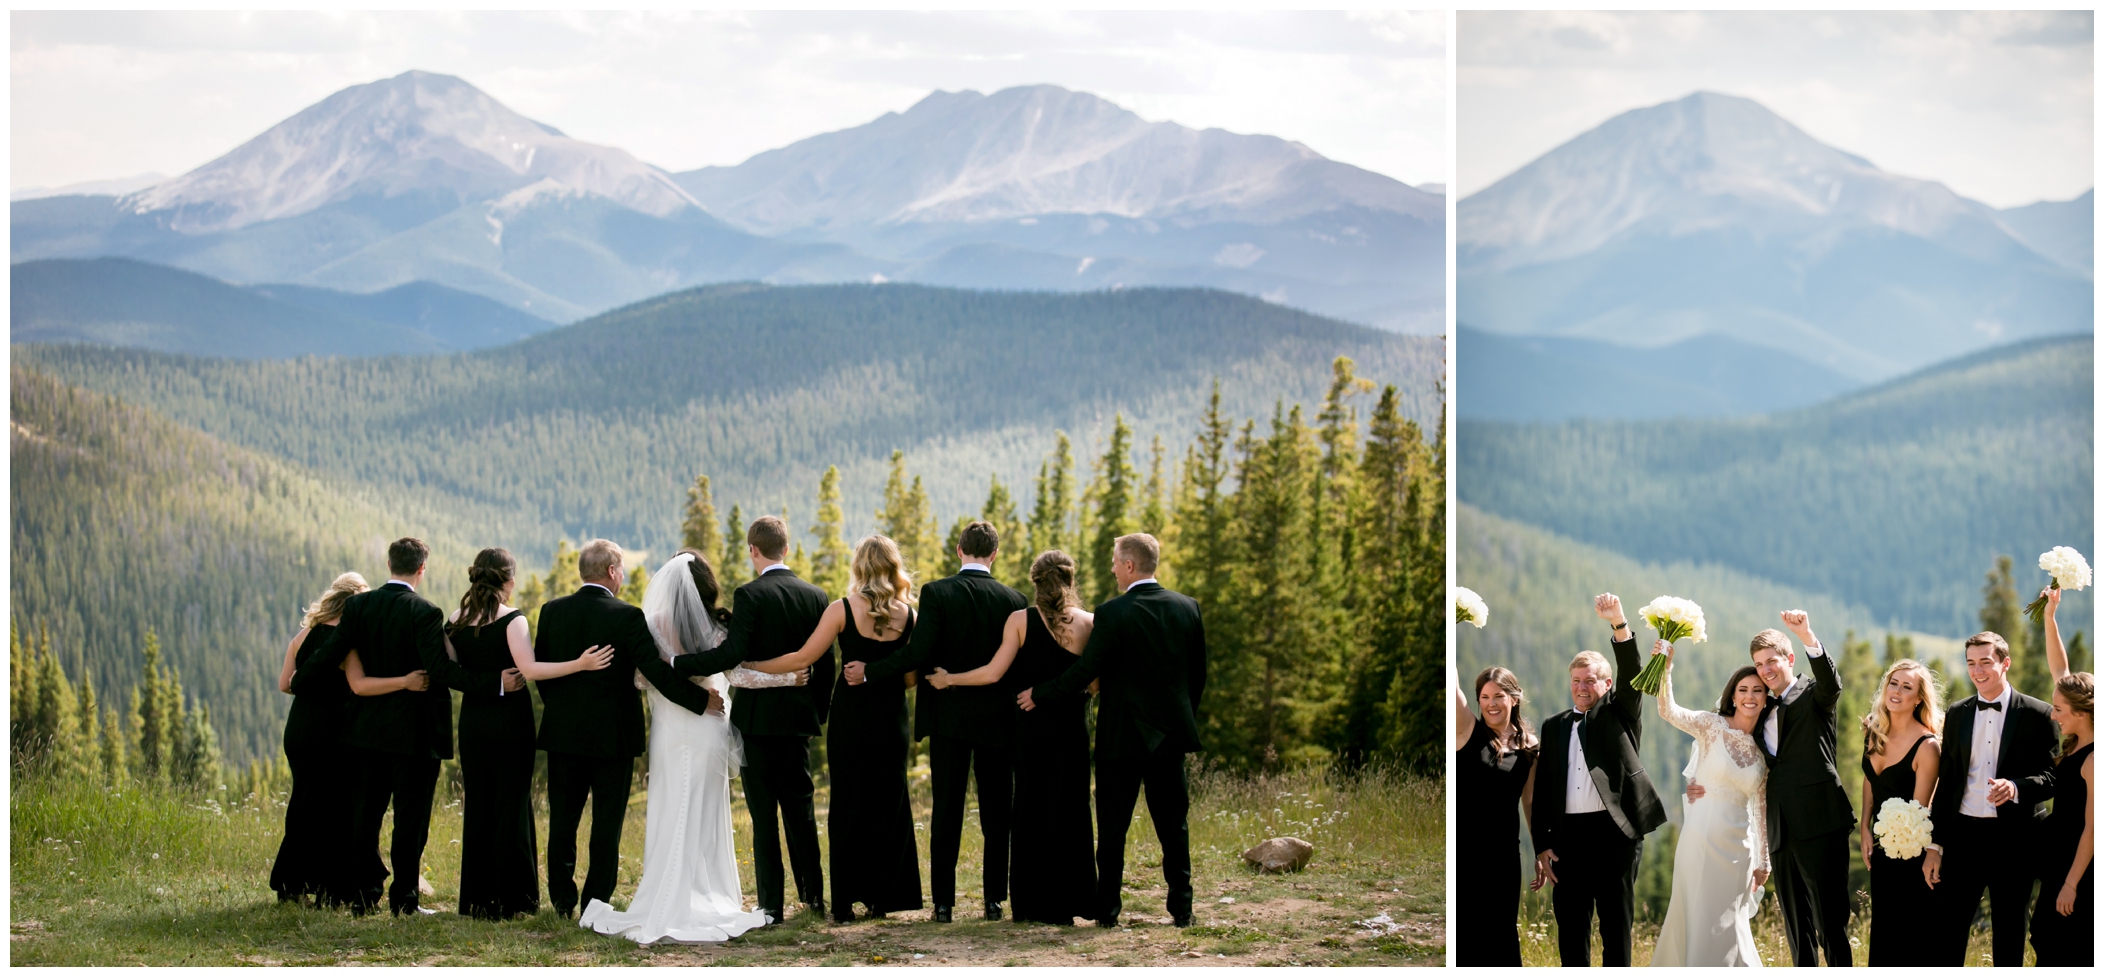 bridal party in black and white with mountains in background at Keystone Colorado wedding